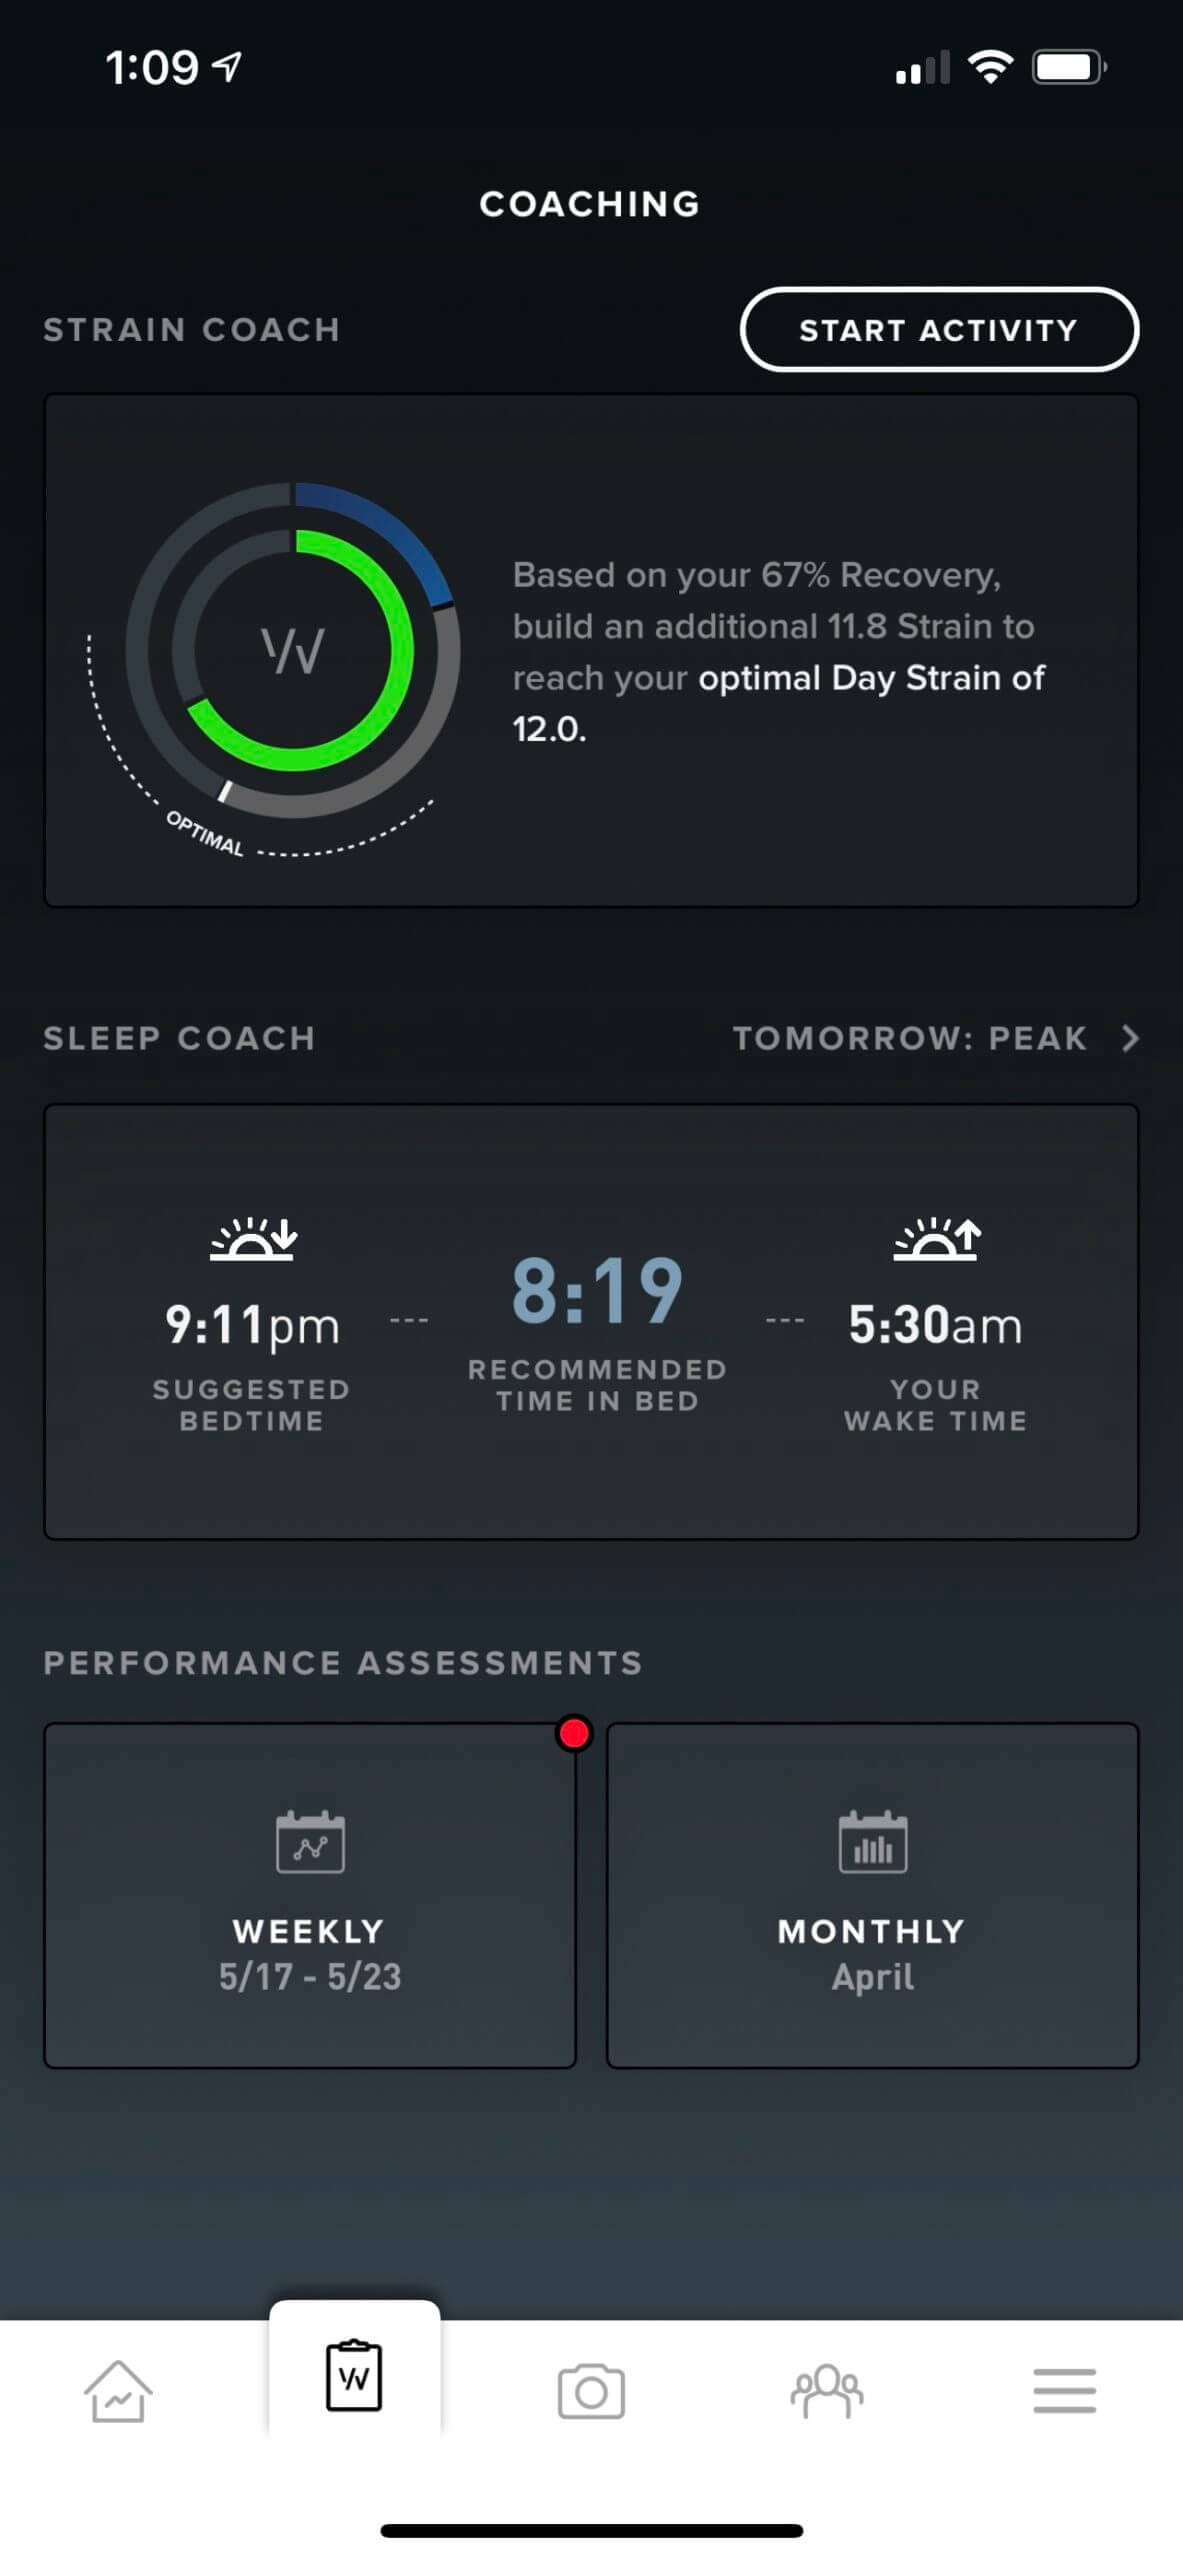 WHOOP’s strain coach can guide you based on your recovery and sleep scores.